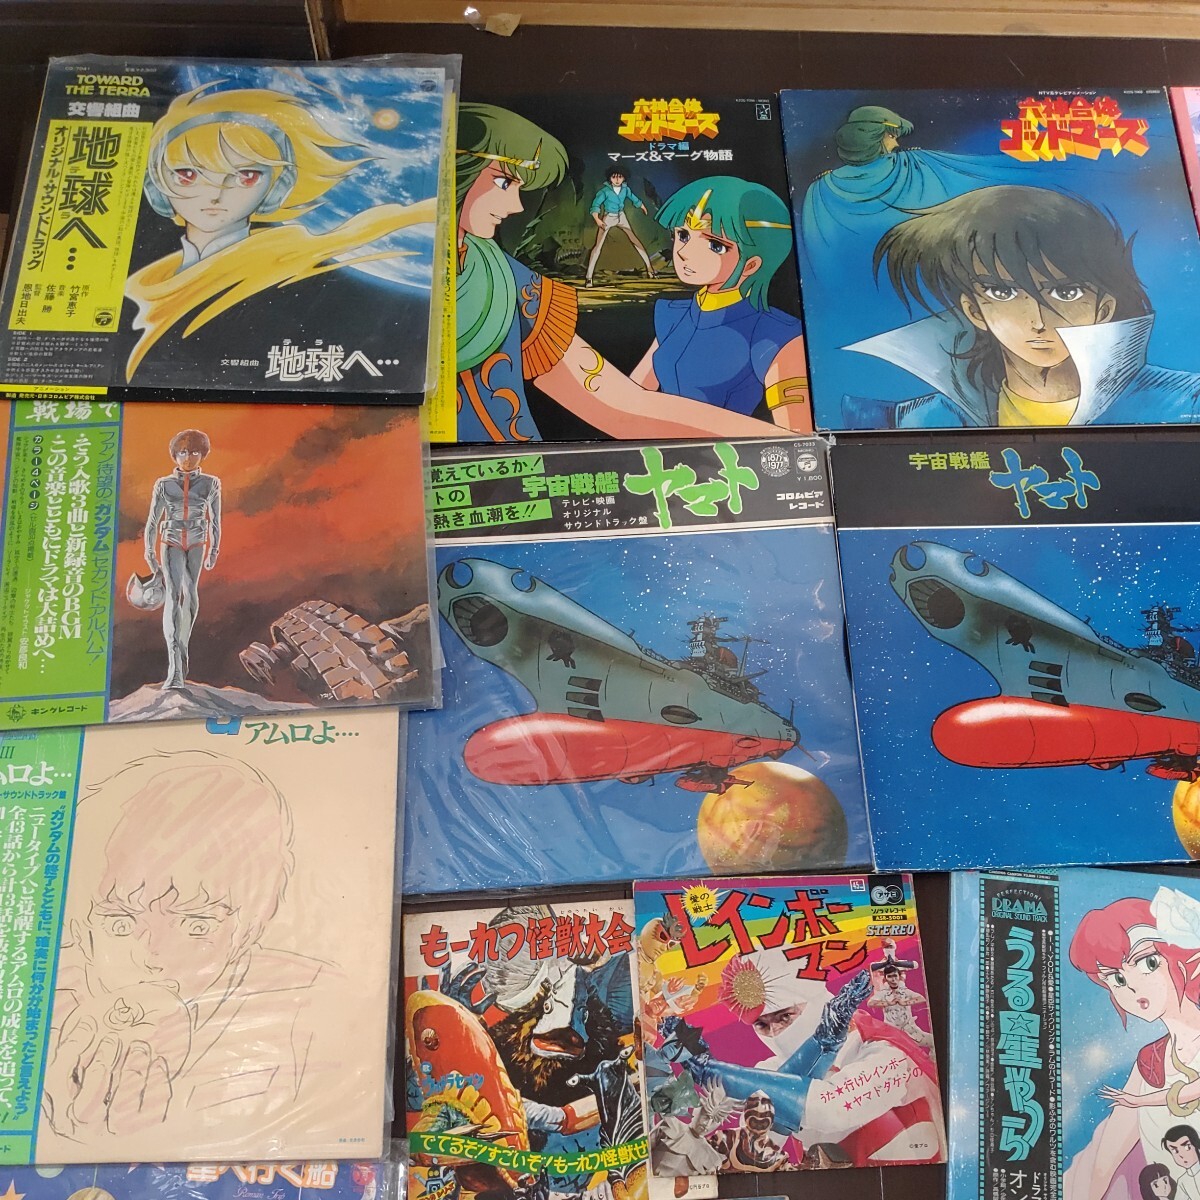 1 jpy anime song anime record anime relation EP LP summarize approximately 20 sheets and more Yamato ... Chan i Caro s Gamera meg Chan Gundam other 